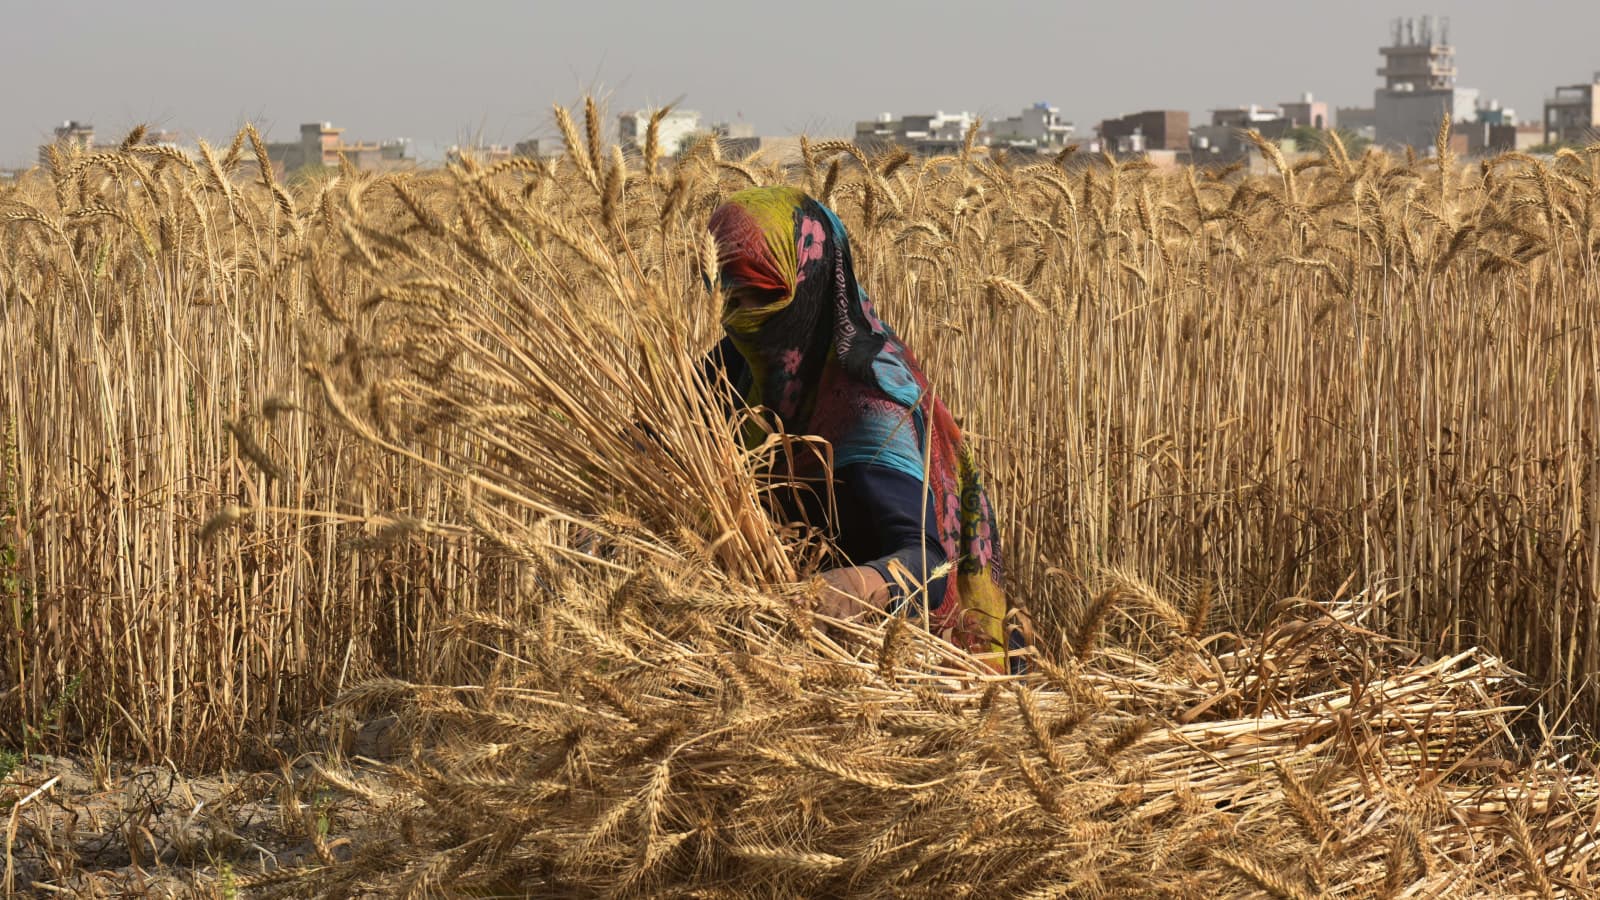 Heat wave in India threatens residents and crucial wheat harvest